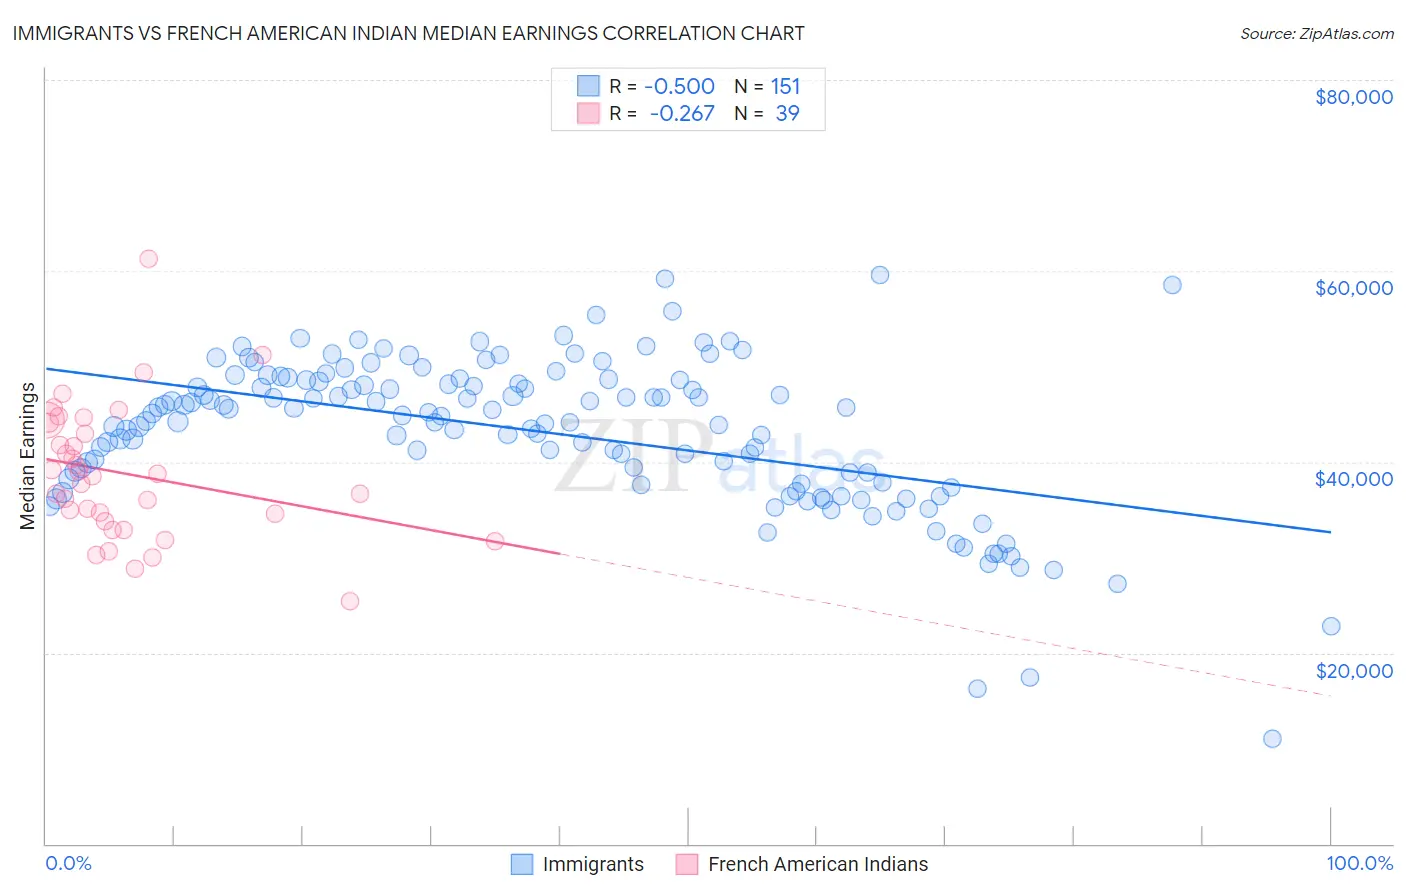 Immigrants vs French American Indian Median Earnings